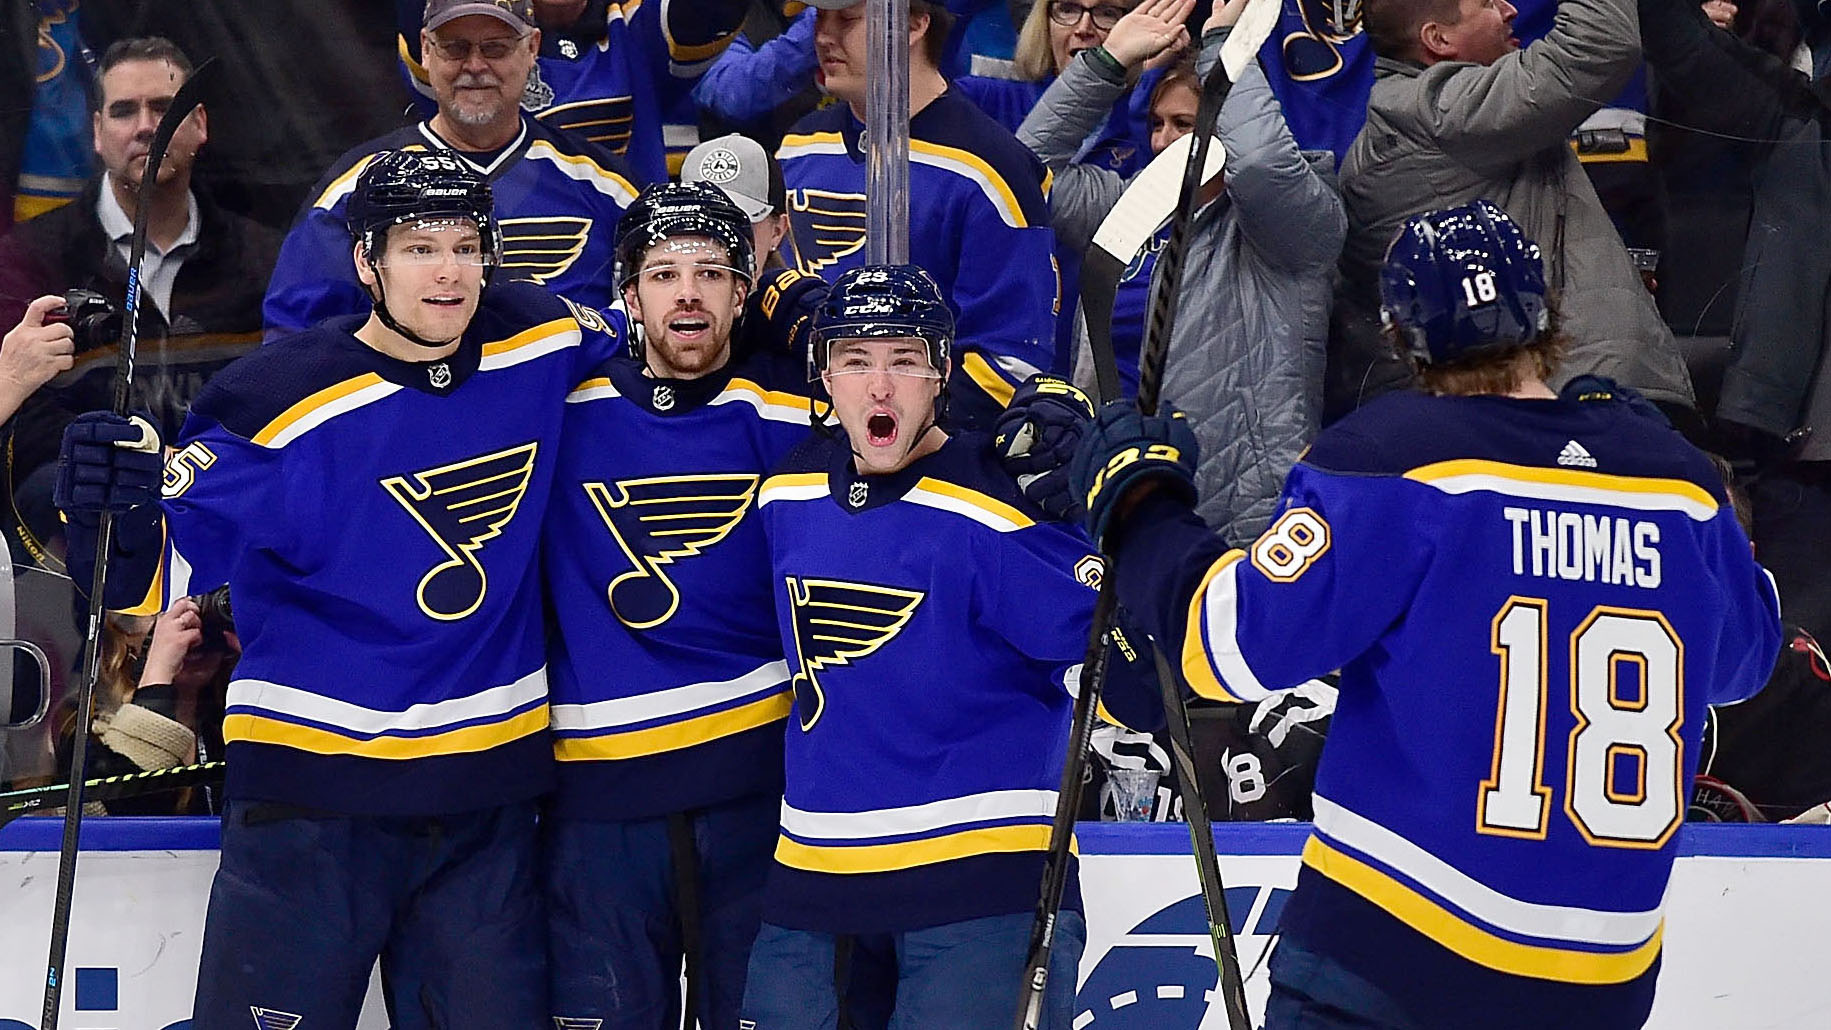 Making the case for St Louis Blues as 2020 Stanley Cup champs - Sports Illustrated